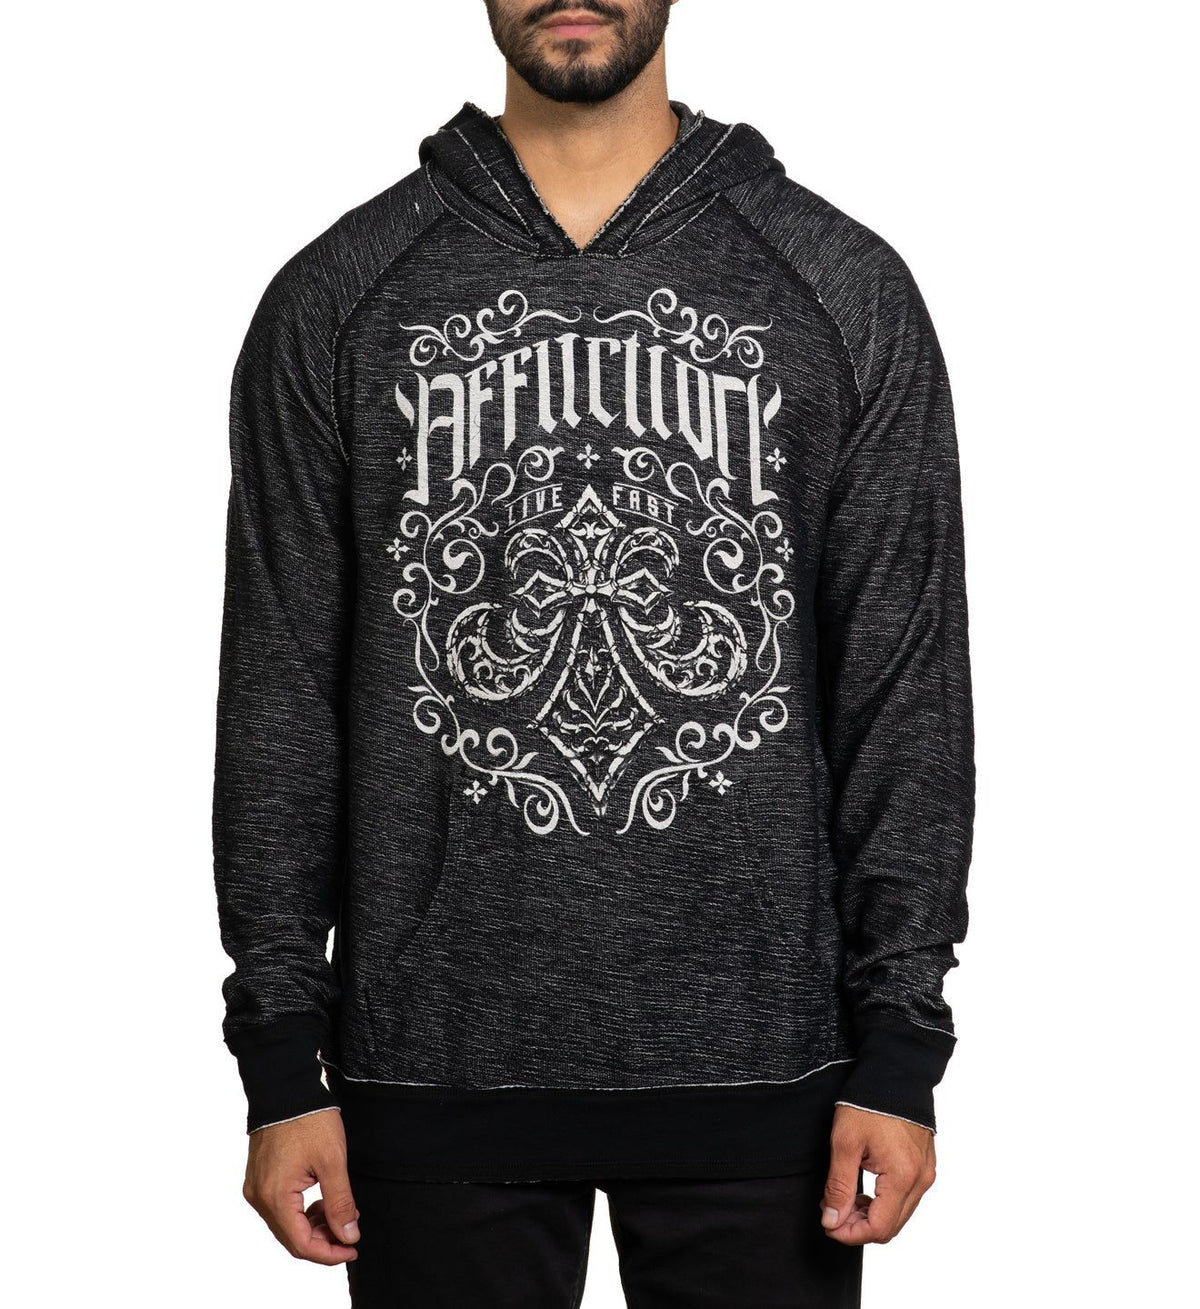 Active Duty - Affliction Clothing